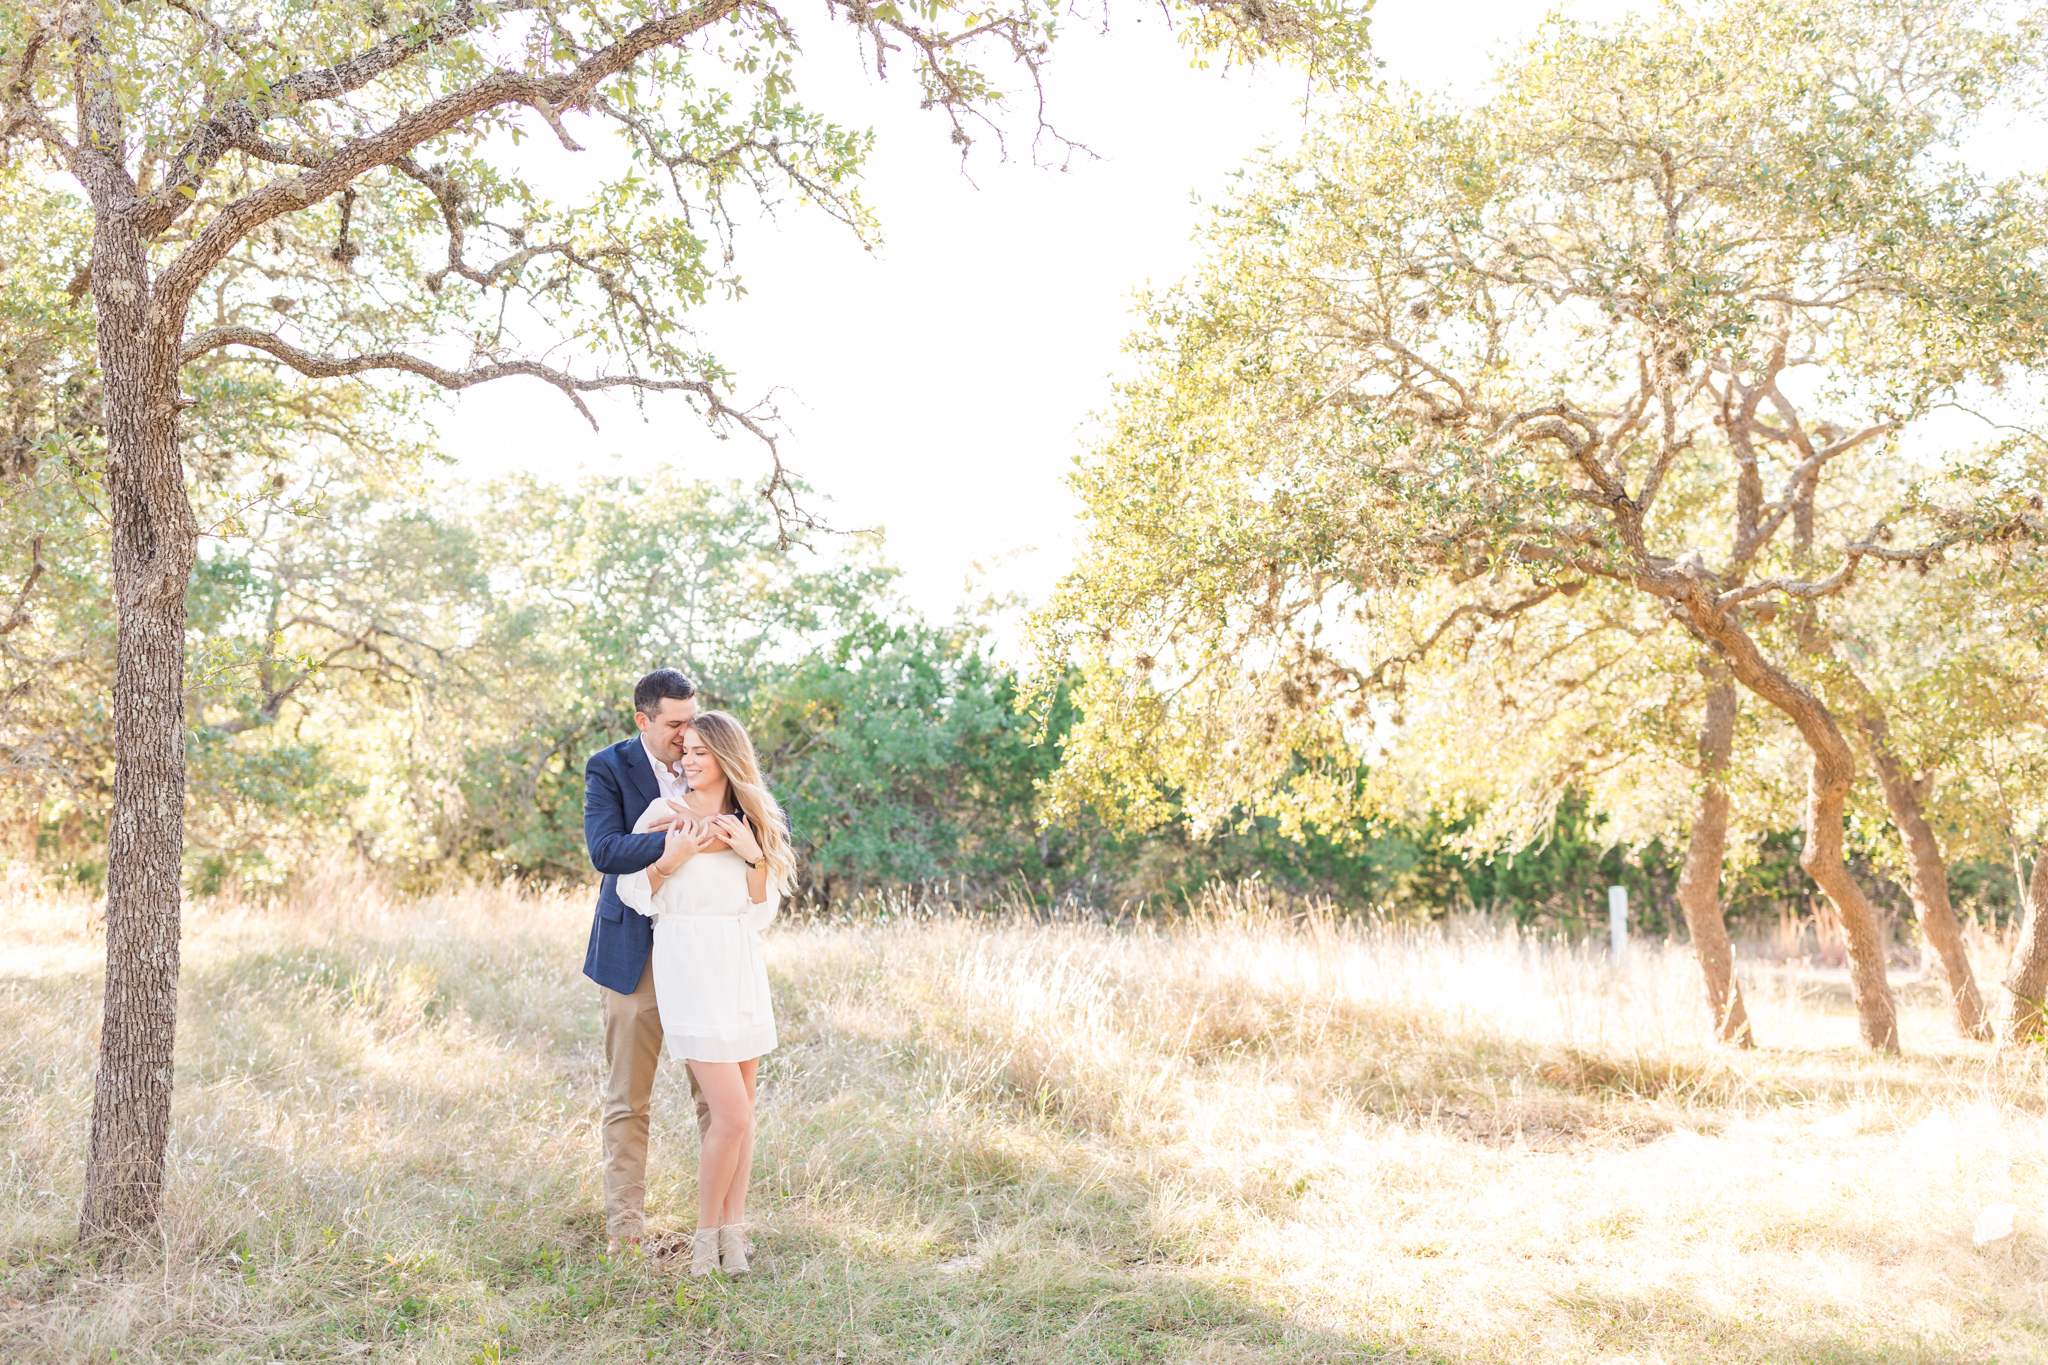 Engagement Session at Overlook Park in Canyon Lake, TX by Dawn Elizabeth Studios, San Antonio Wedding Photographer